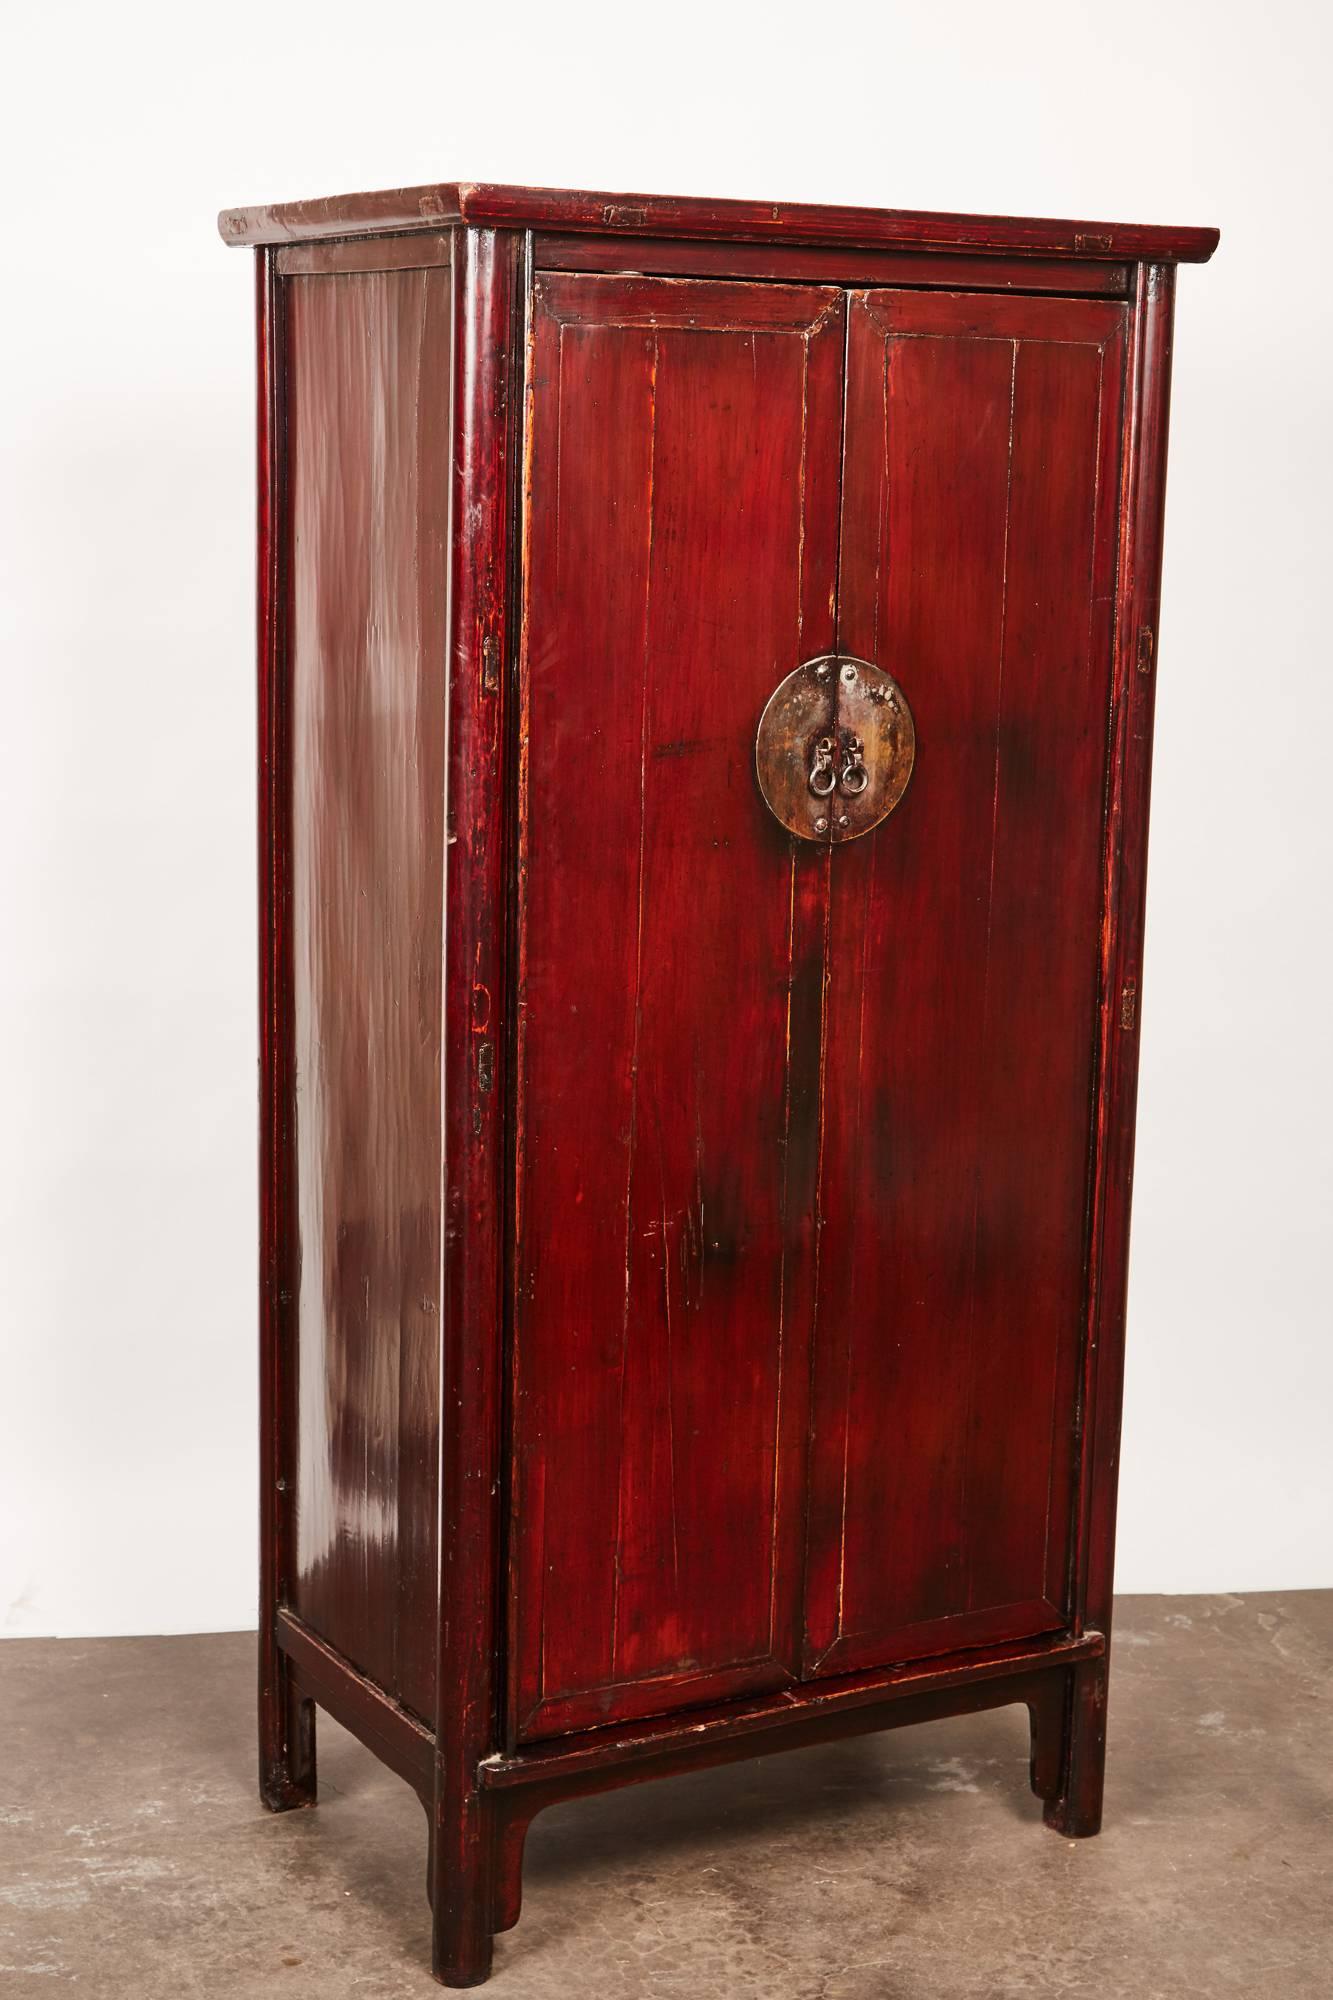 A lacquer finished 18th century Chinese two-door cabinet with a set of small round legs. This simple and Classic piece comes from Henan Province and contains al original hardware and finishing.